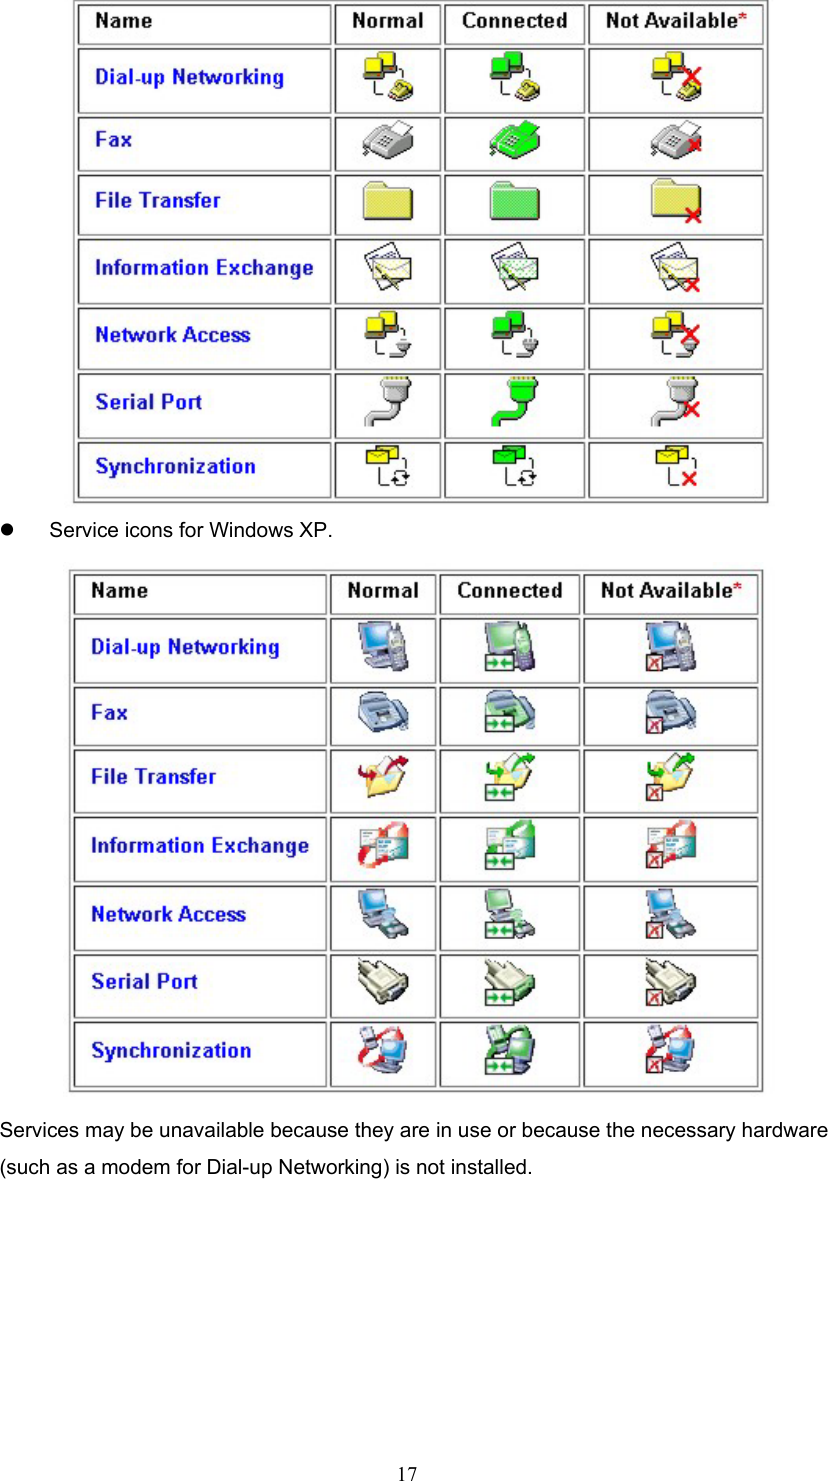  17    Service icons for Windows XP.  Services may be unavailable because they are in use or because the necessary hardware (such as a modem for Dial-up Networking) is not installed. 